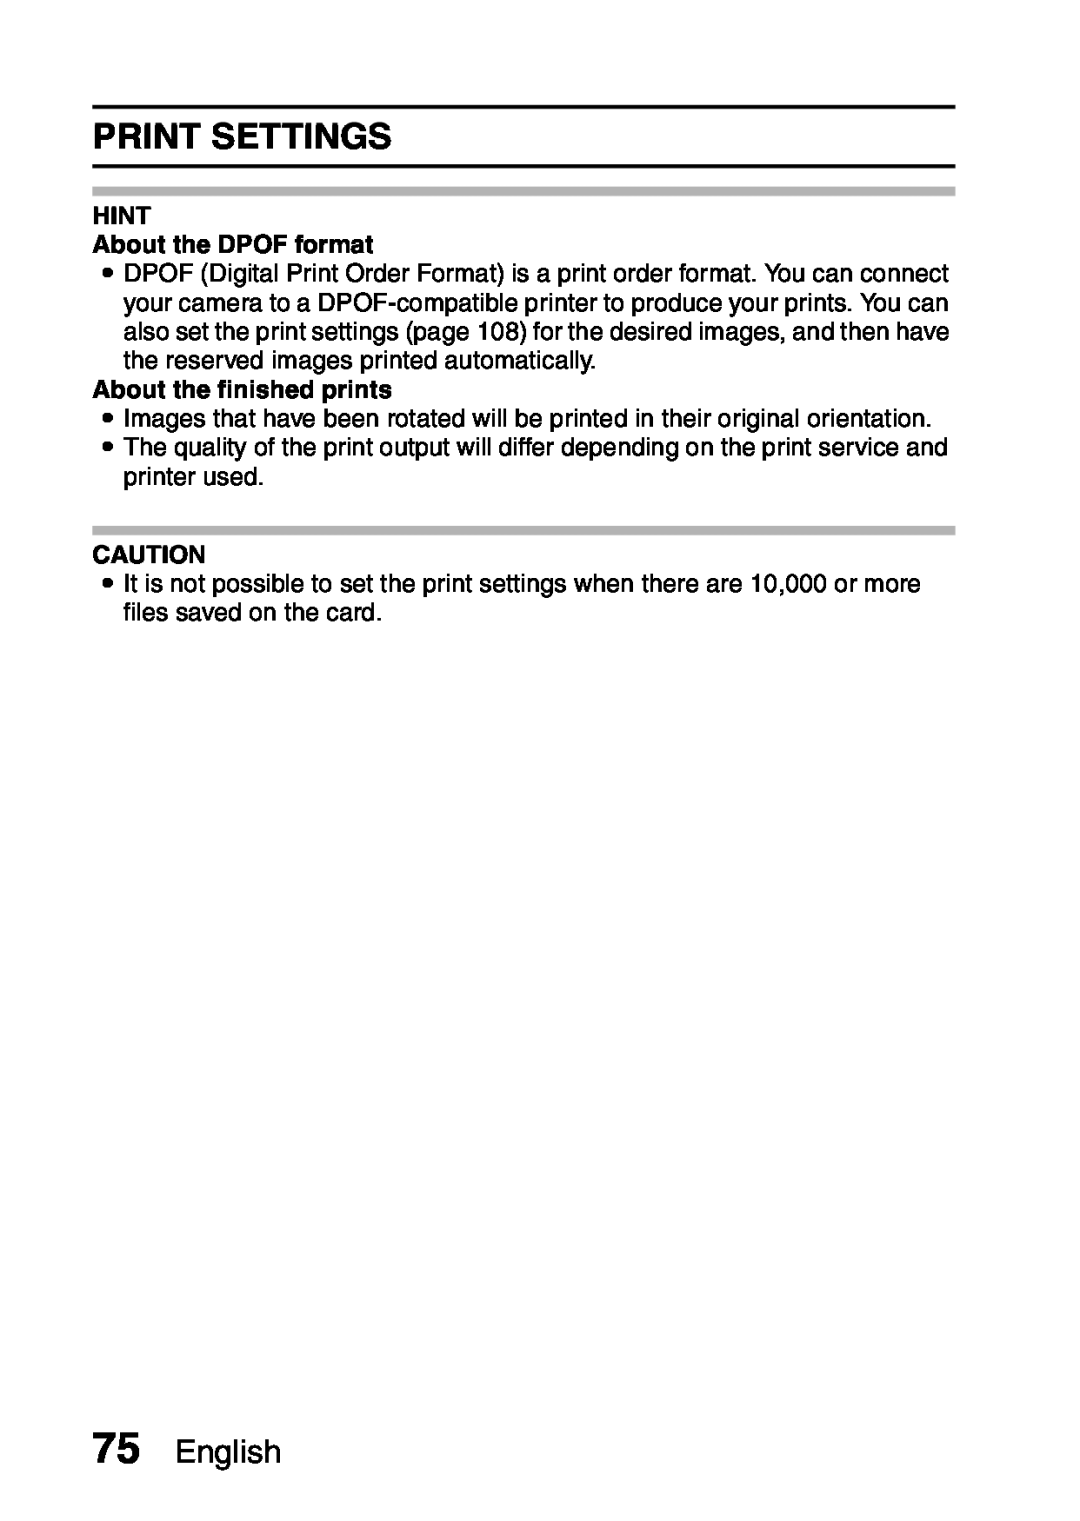 Sanyo VPC-S60 instruction manual Print Settings, English, HINT About the DPOF format, About the finished prints 